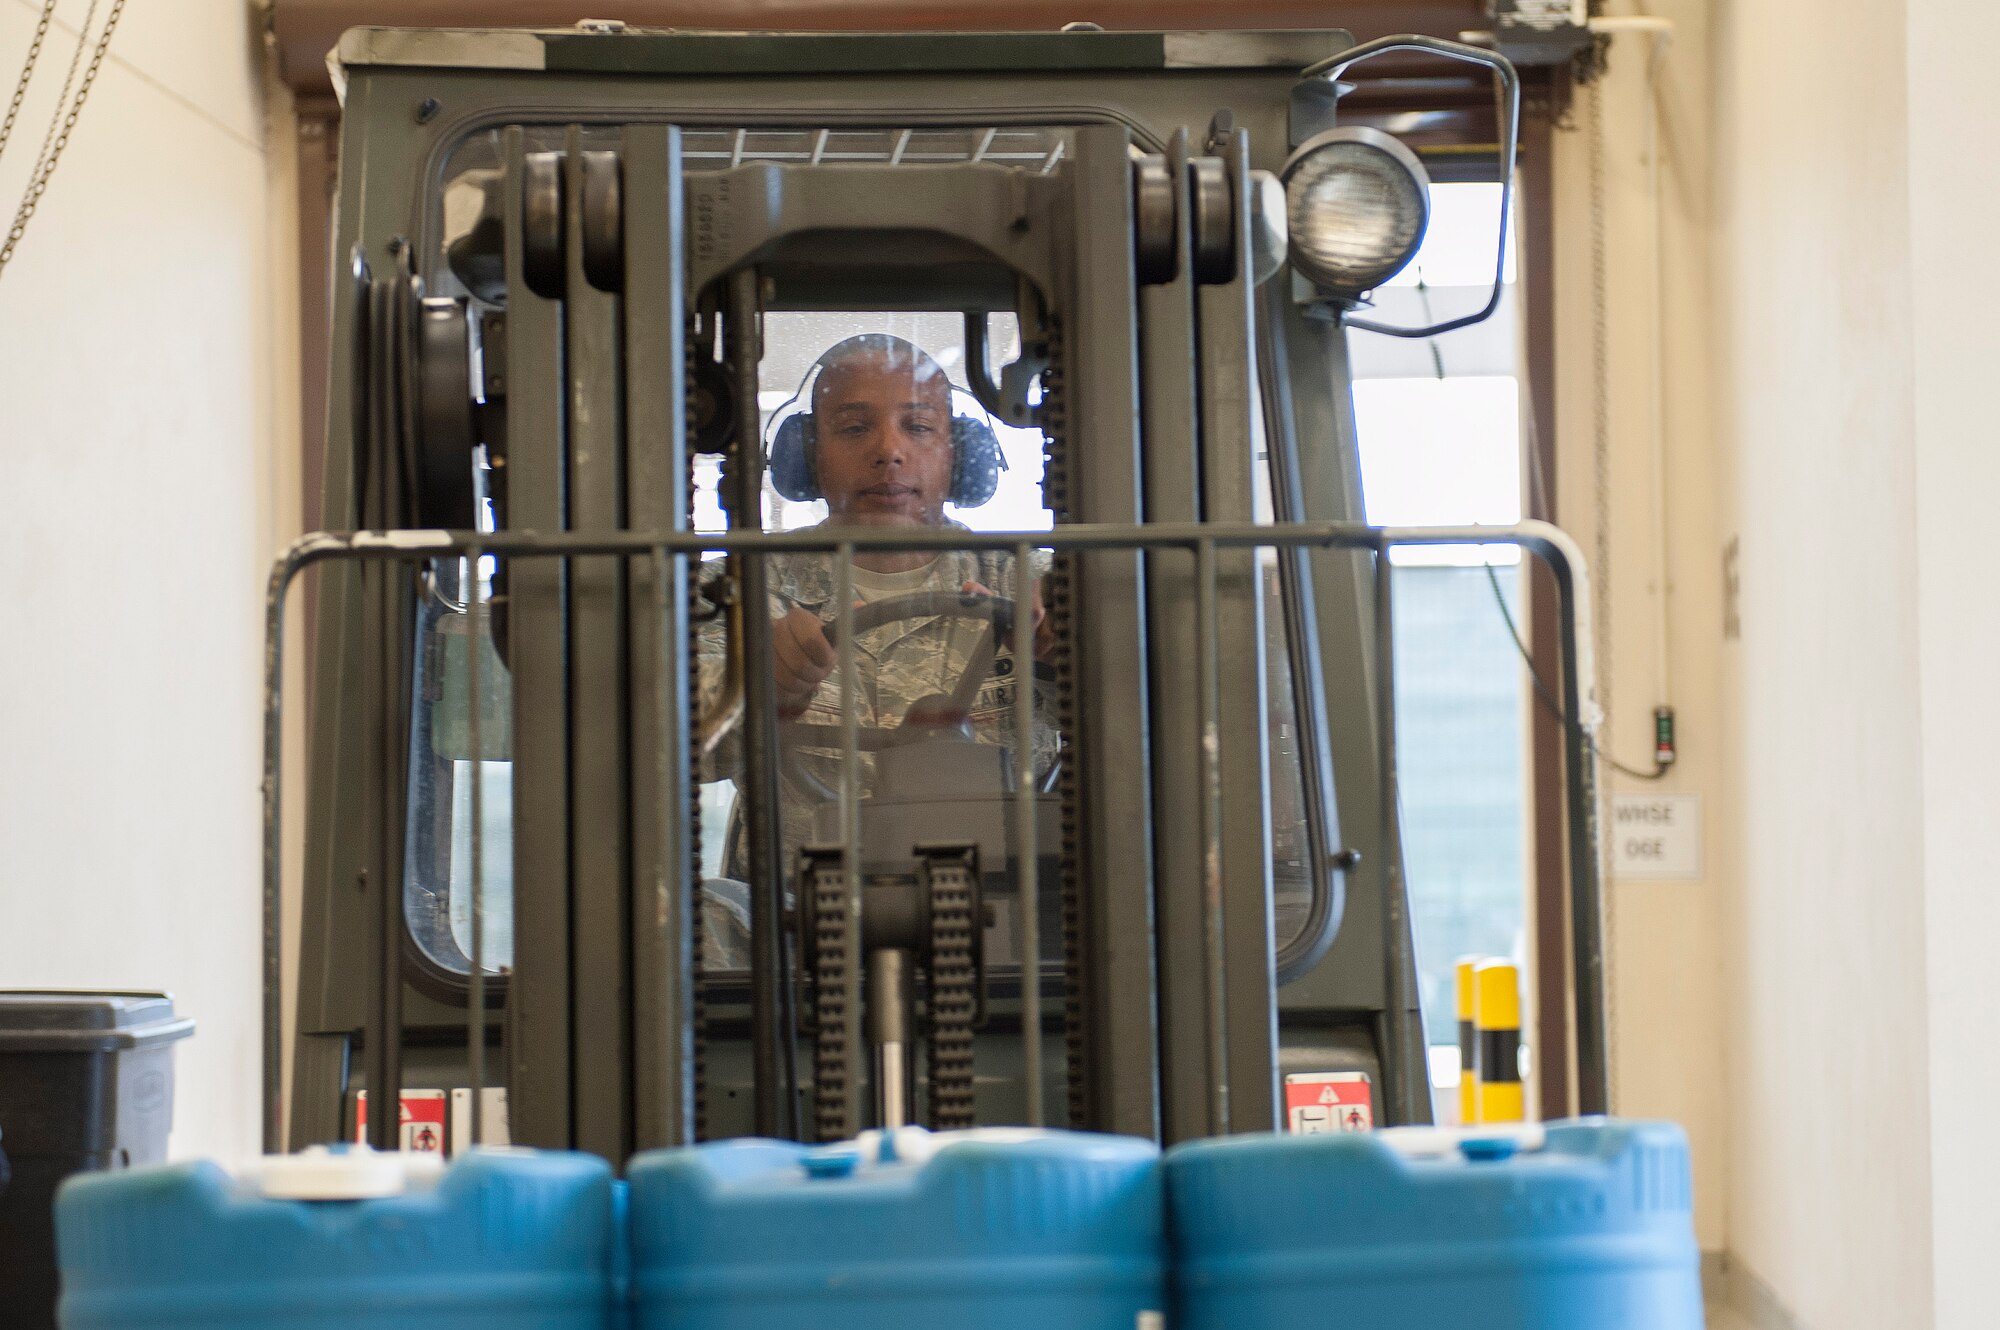 Airman 1st Class Lorenzo Lucas, 39th Logistics Readiness Squadron hazardous materials journeyman, drives a forklift Sept. 18, 2013, at Incirlik Air Base, Turkey. Lucas along with other HAZMAT Airmen, are responsible for maintaining and issuing hazardous materials at Incirlik AB. (U.S. Air Force photo by Airman 1st Class Nicole Sikorski/Released)